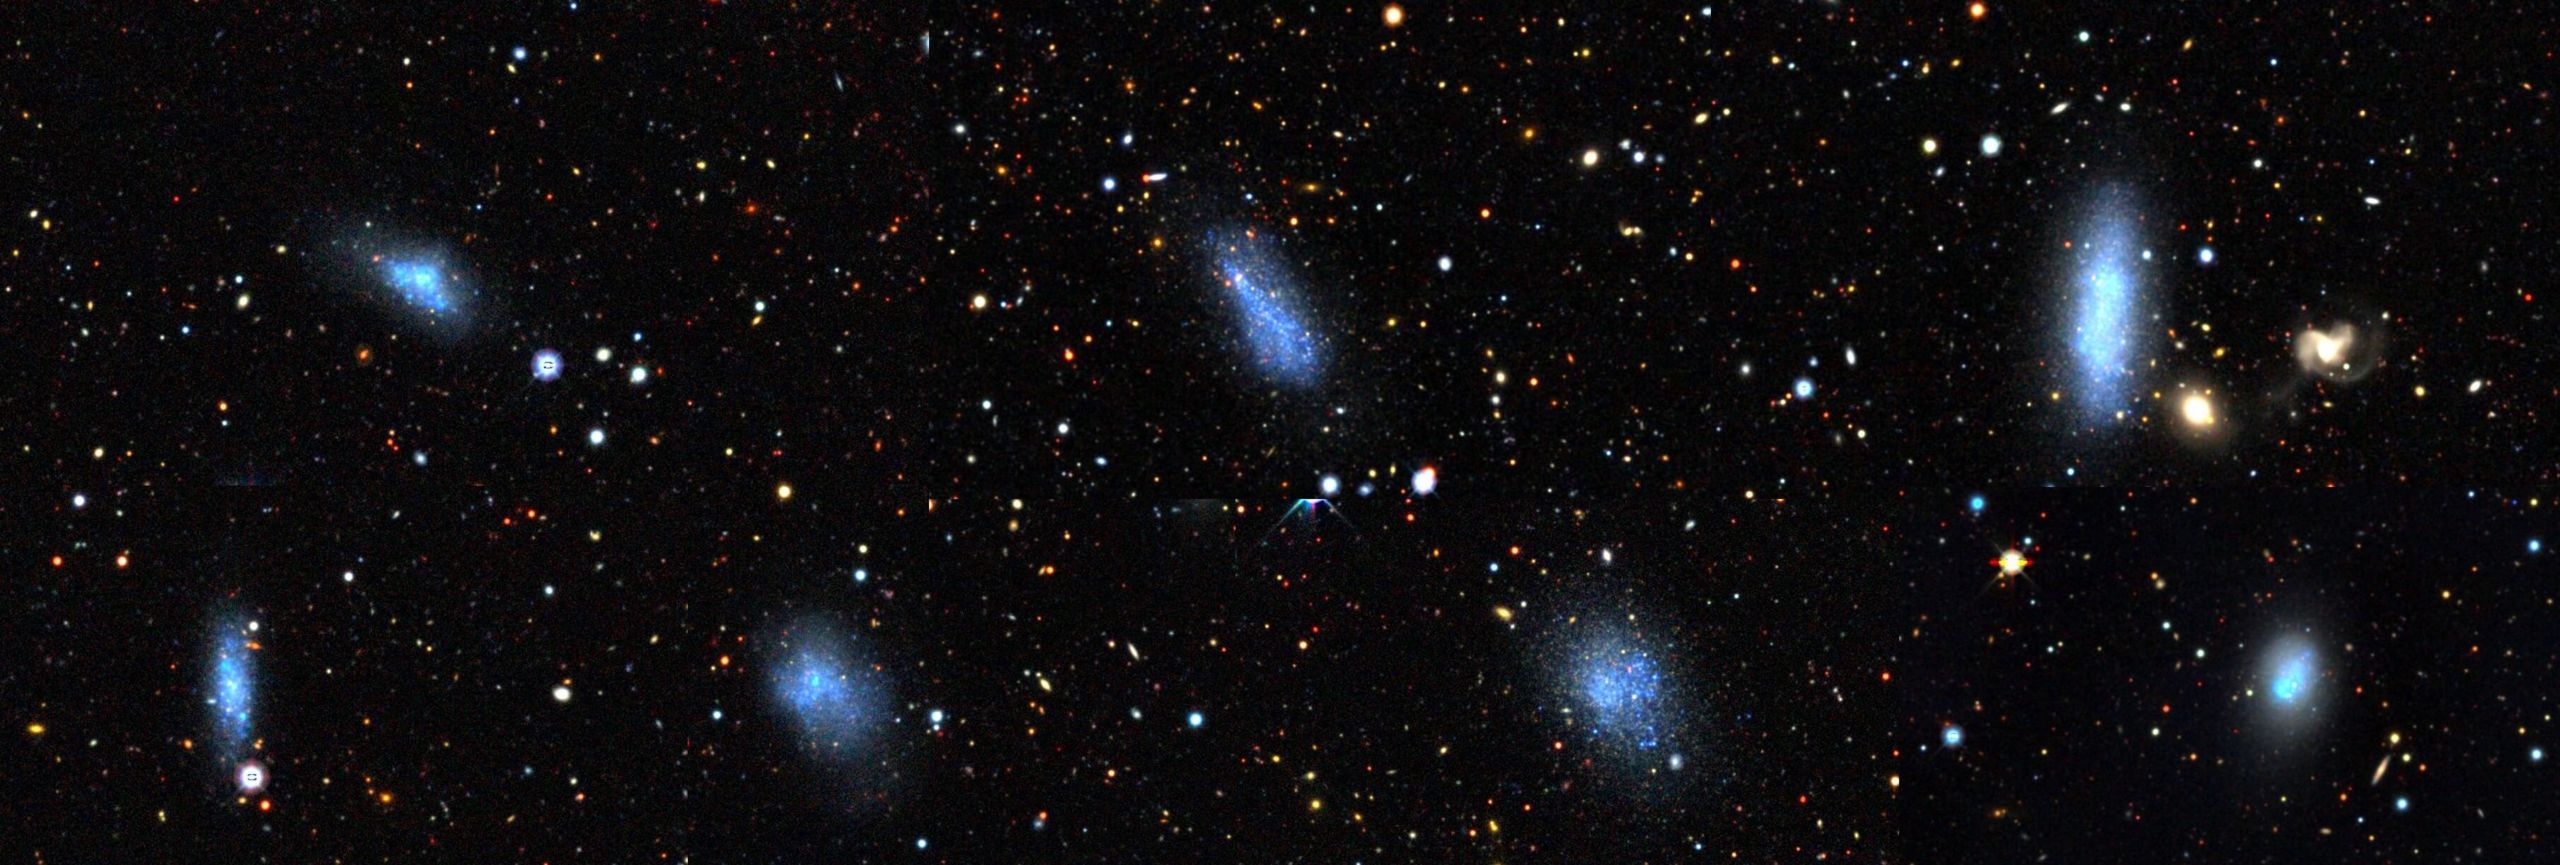 7 dwarf galaxies as seen by the legacy survey DR9